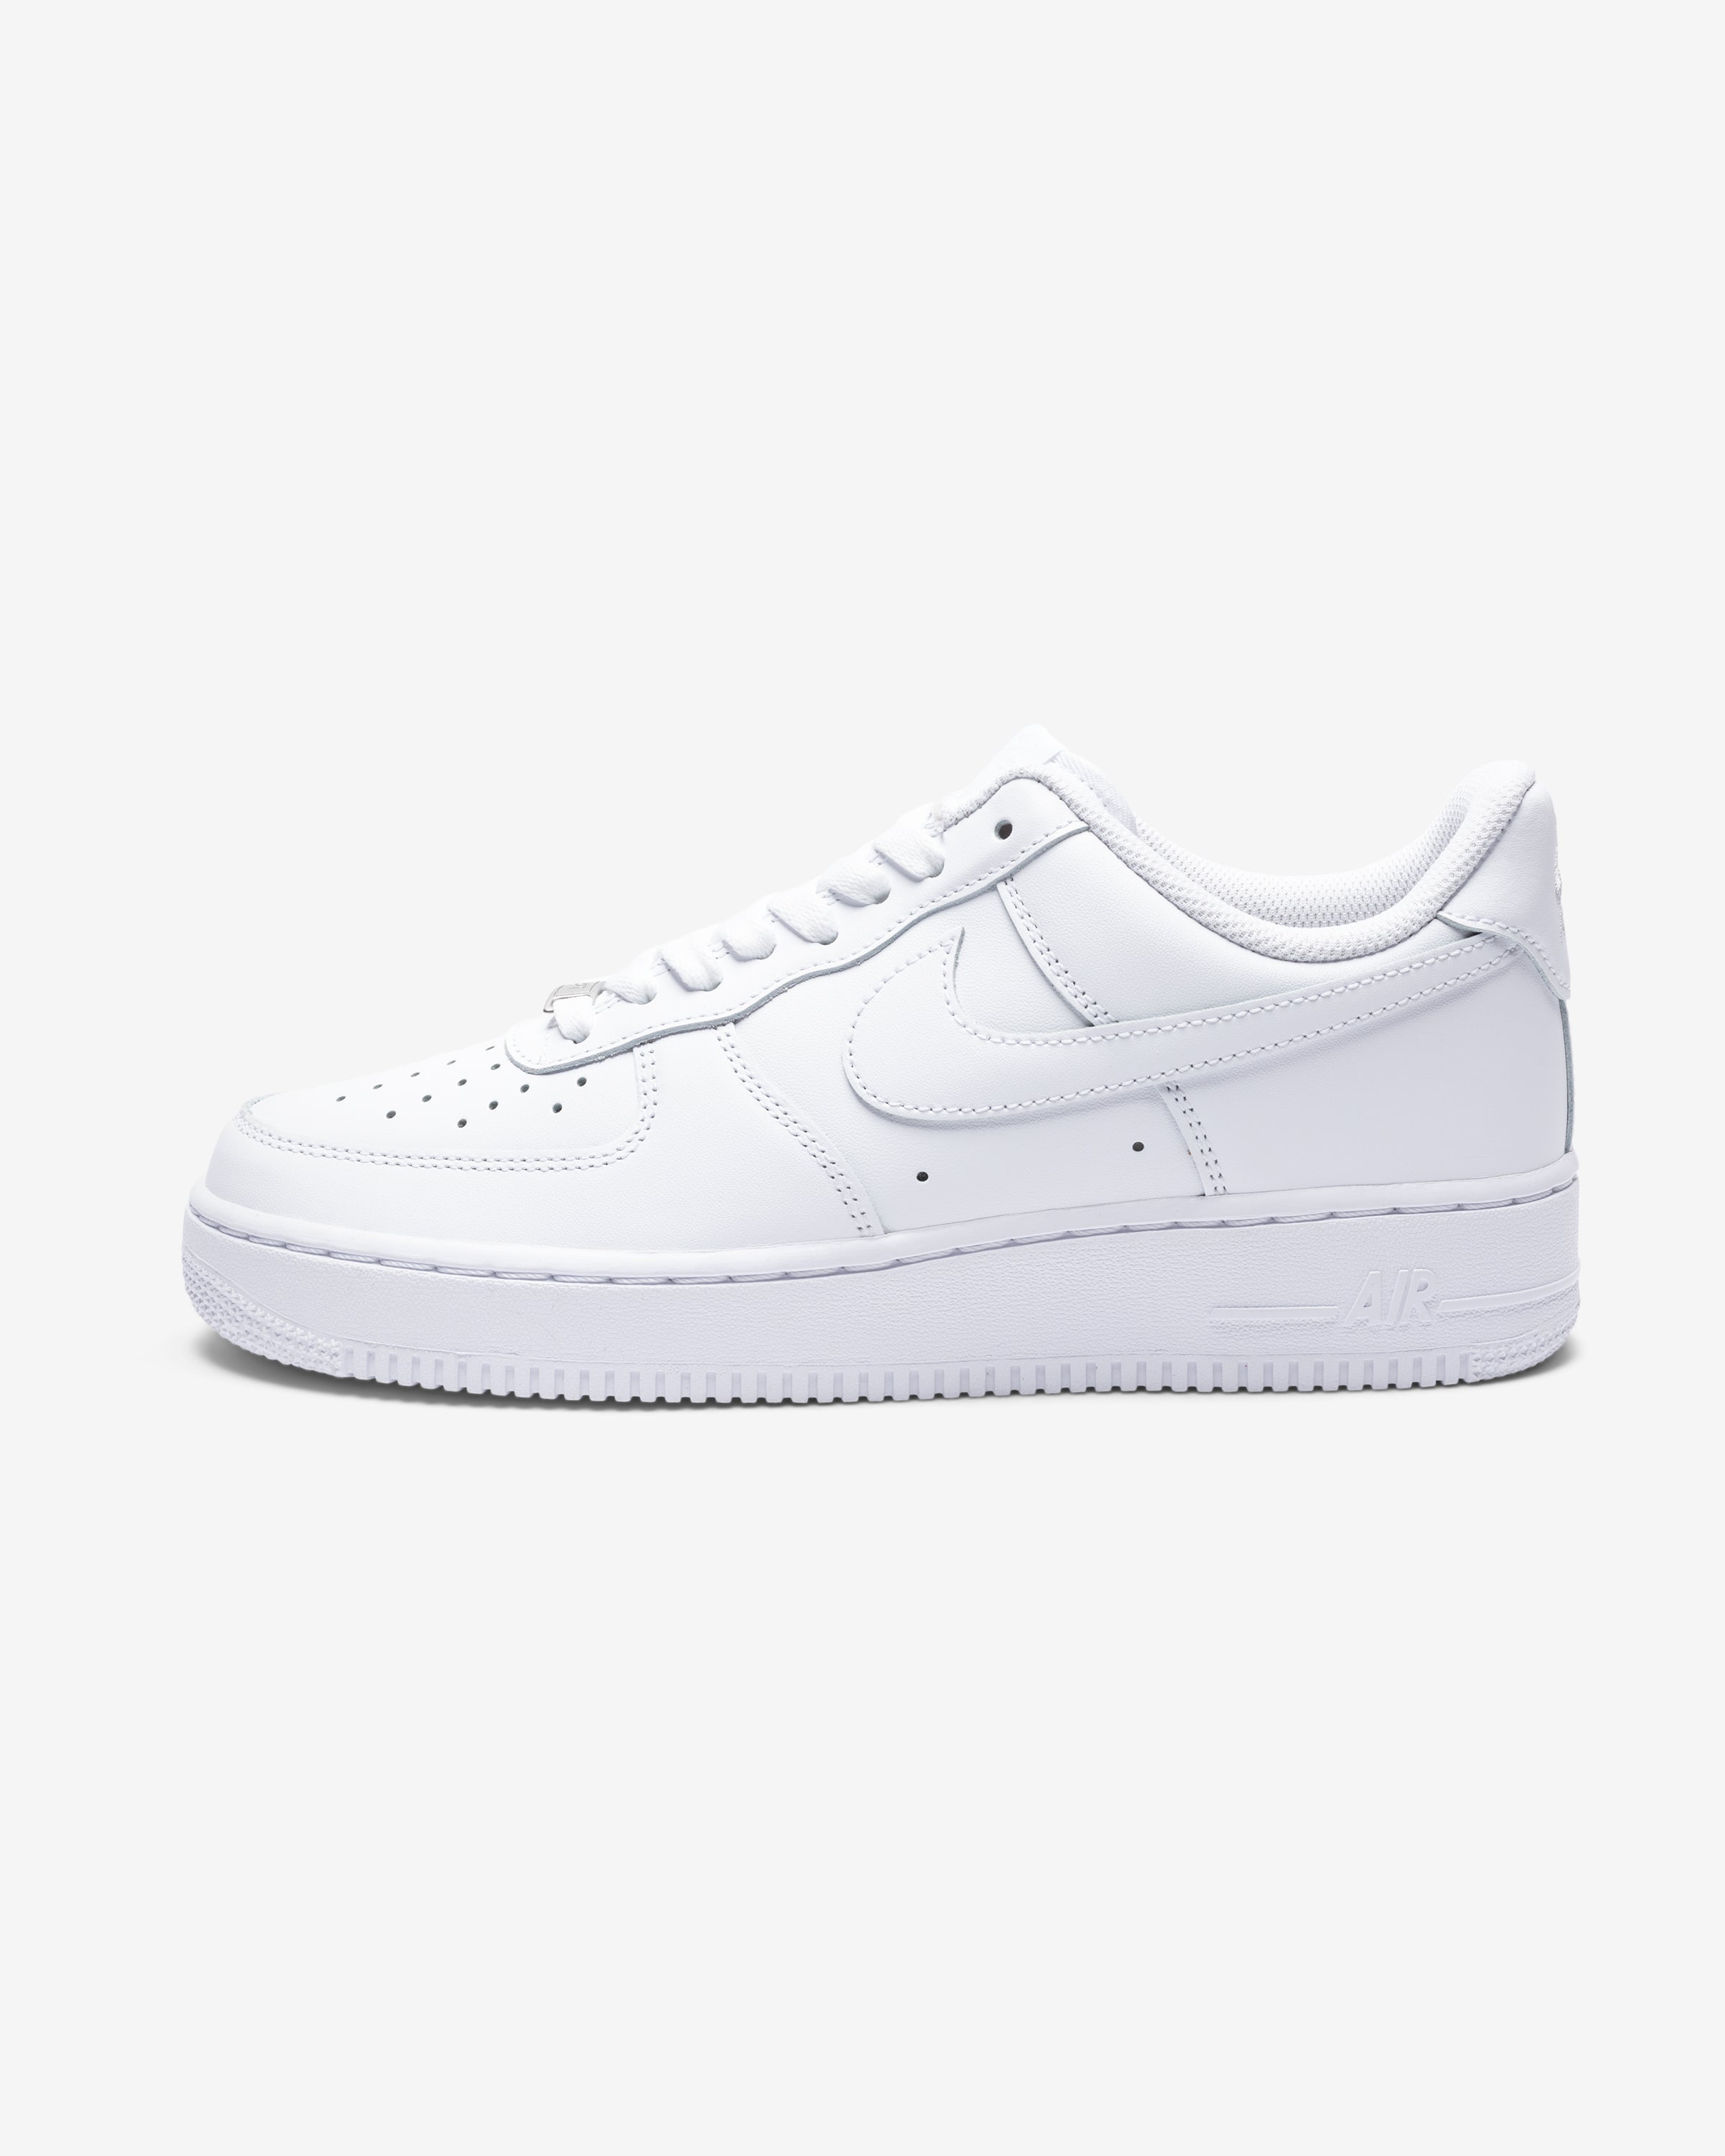 NIKE AIR FORCE 1 '07 - WHITE – Undefeated